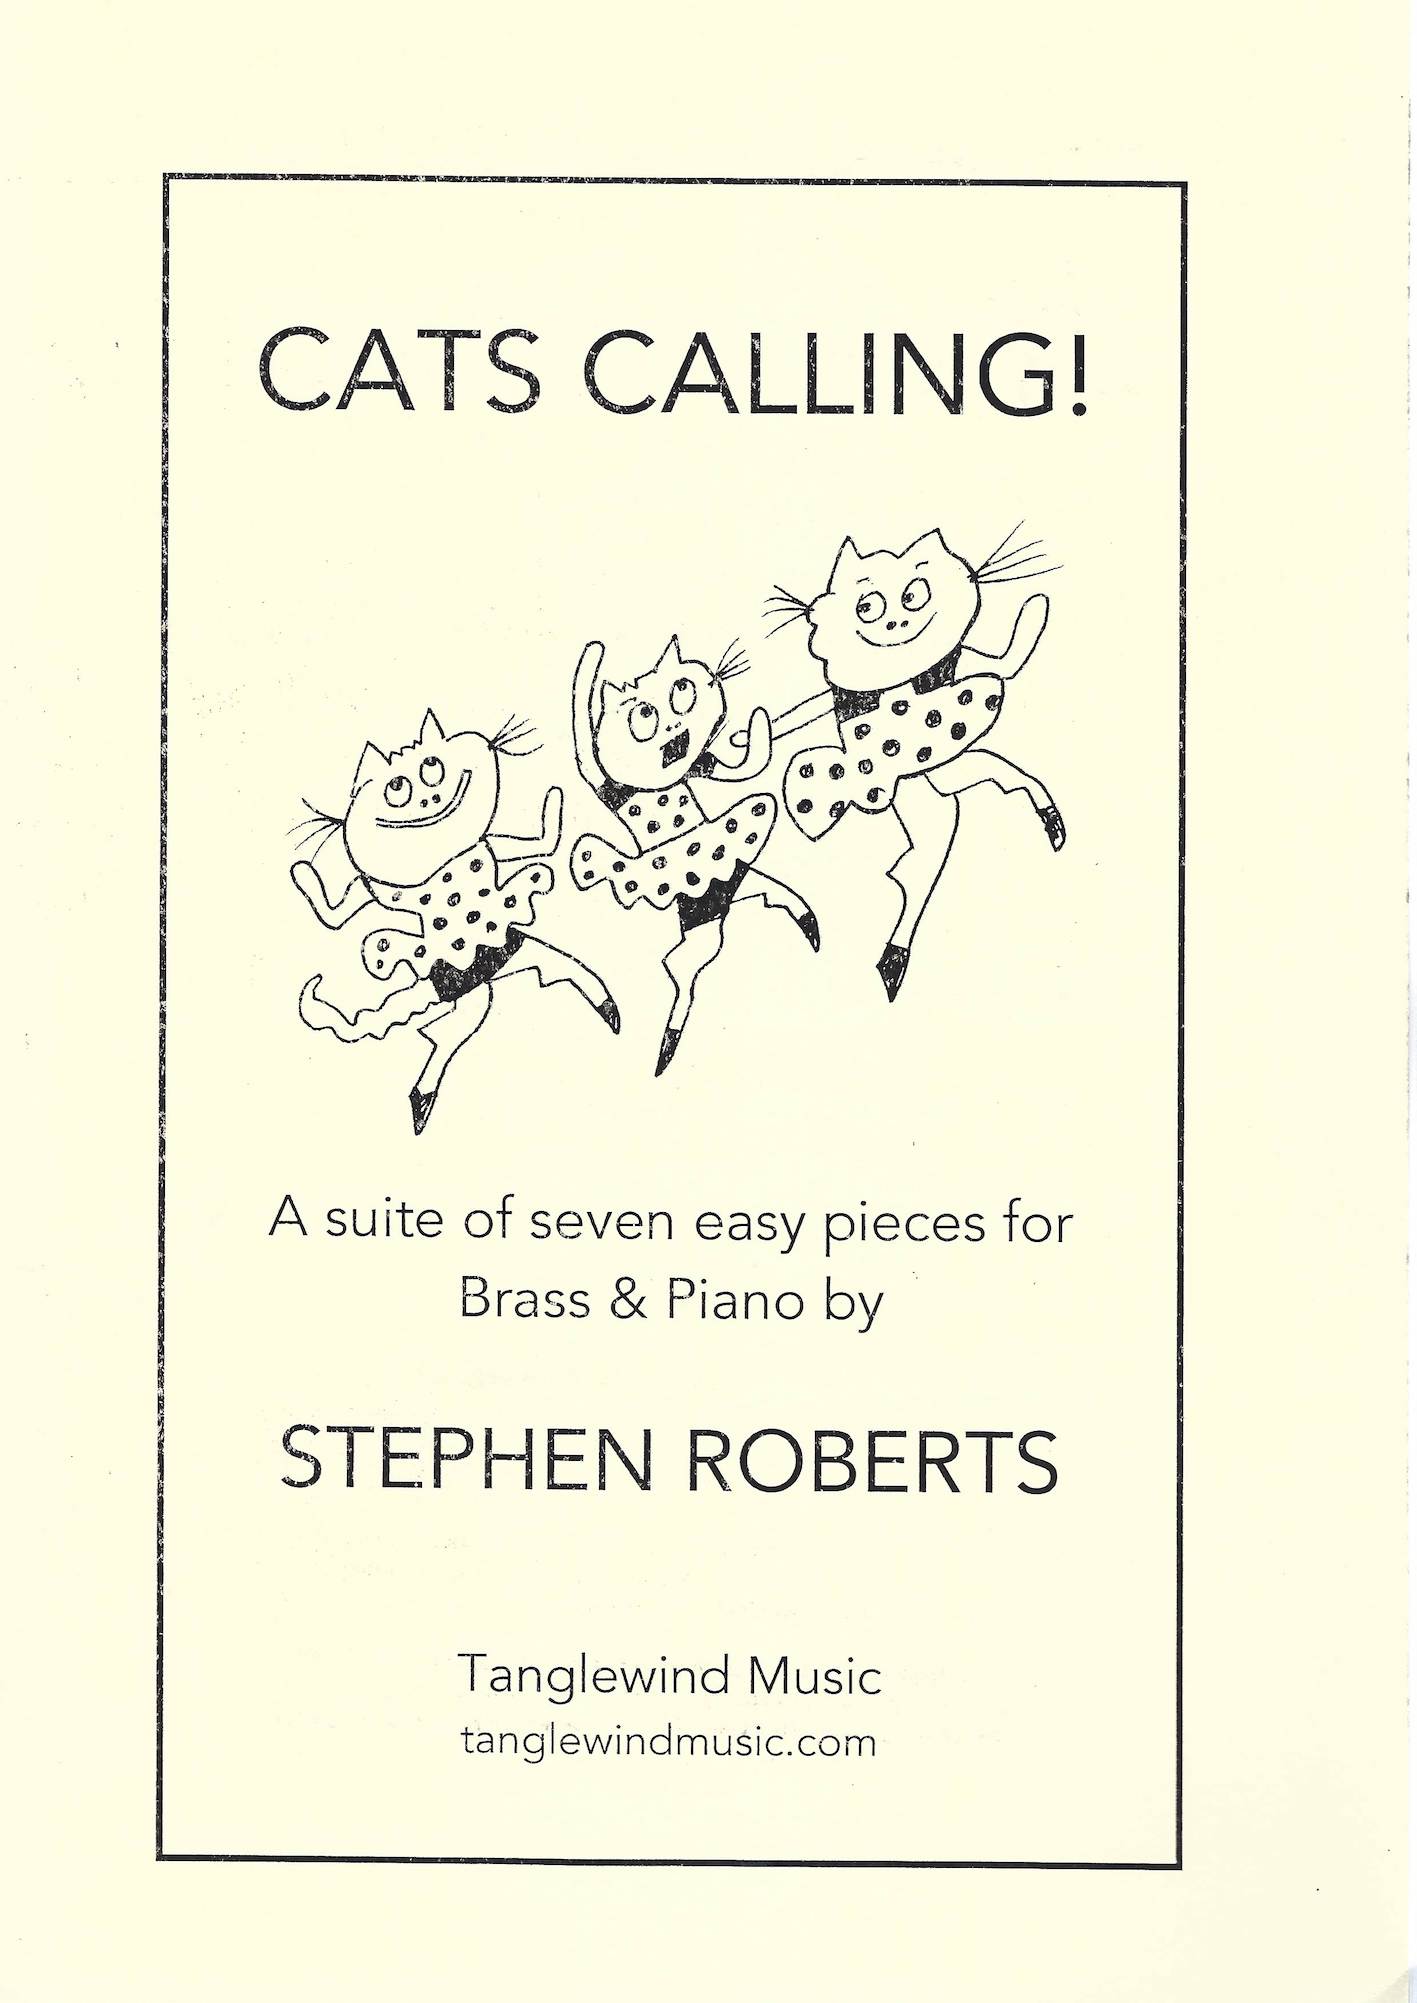 Cats Calling (A Suite of Seven Easy Pieces for Brass and Piano)- Stephen Roberts